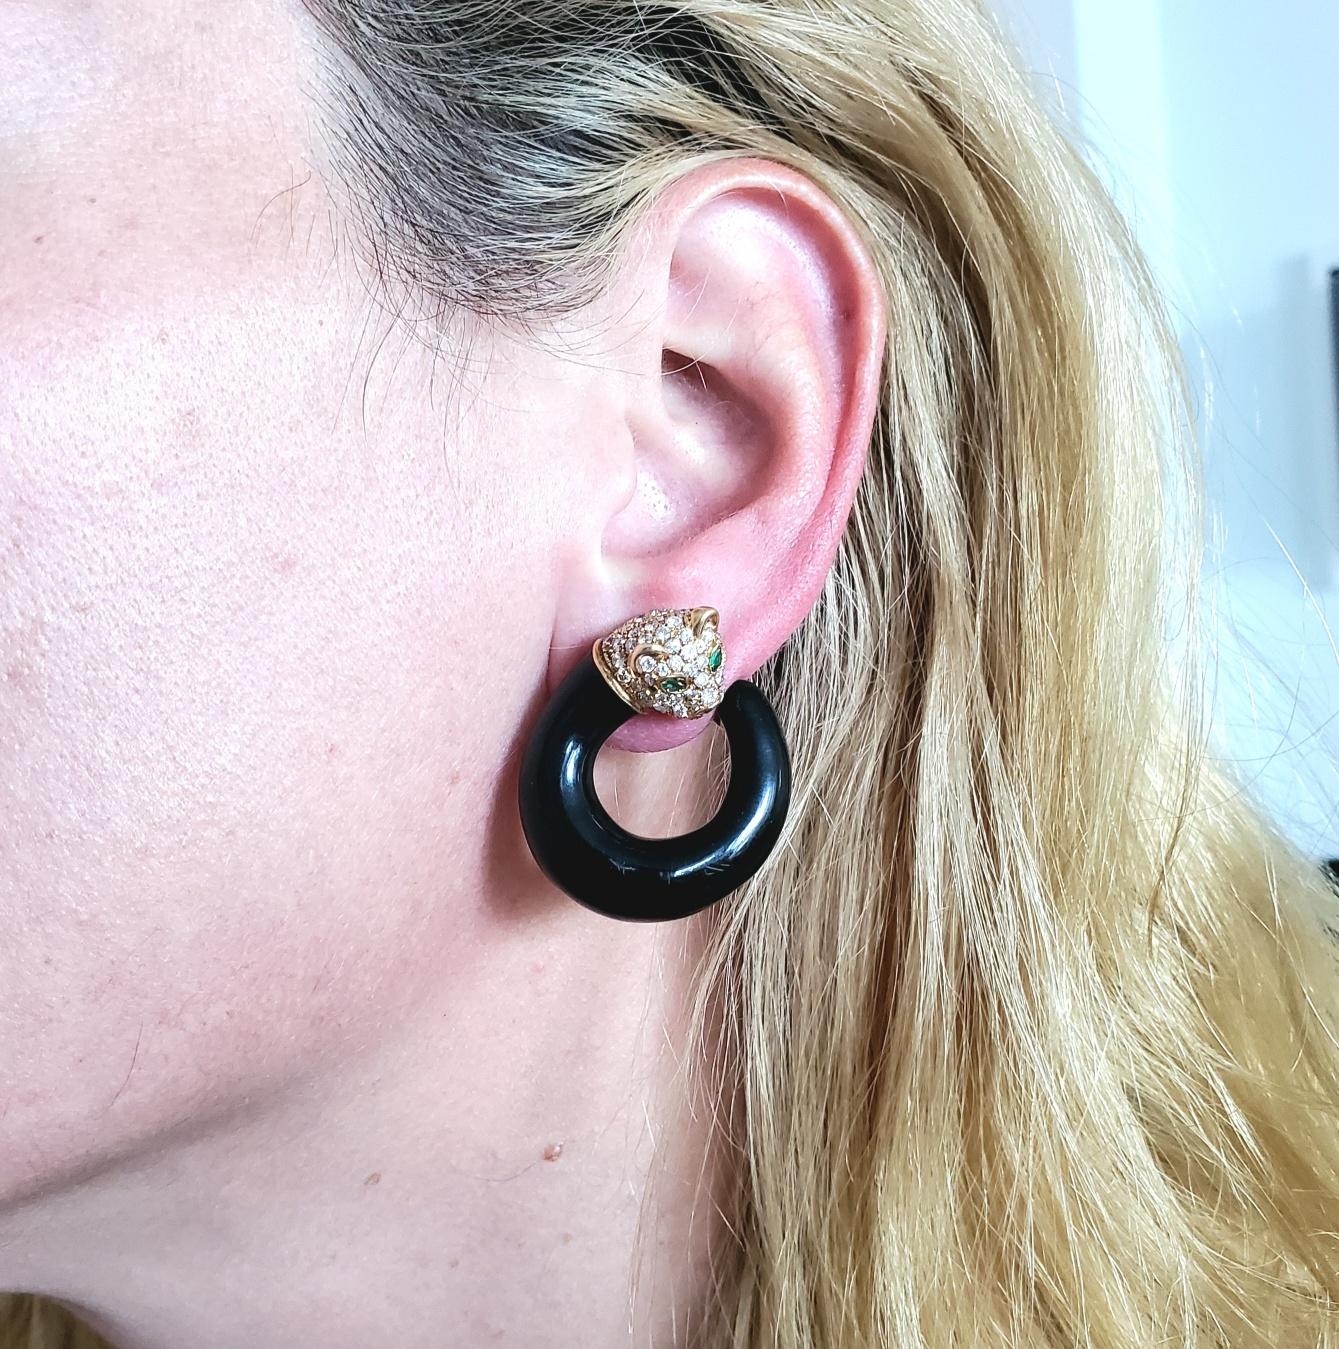 Panther clips earrings designed by Fred of Paris.

Beautiful pair of rounded panthers clip-on earrings, created in Paris France by the jewelry house of Fred Joaillier, back in the late 1970's. This gem set pair has been crafted in the shape of